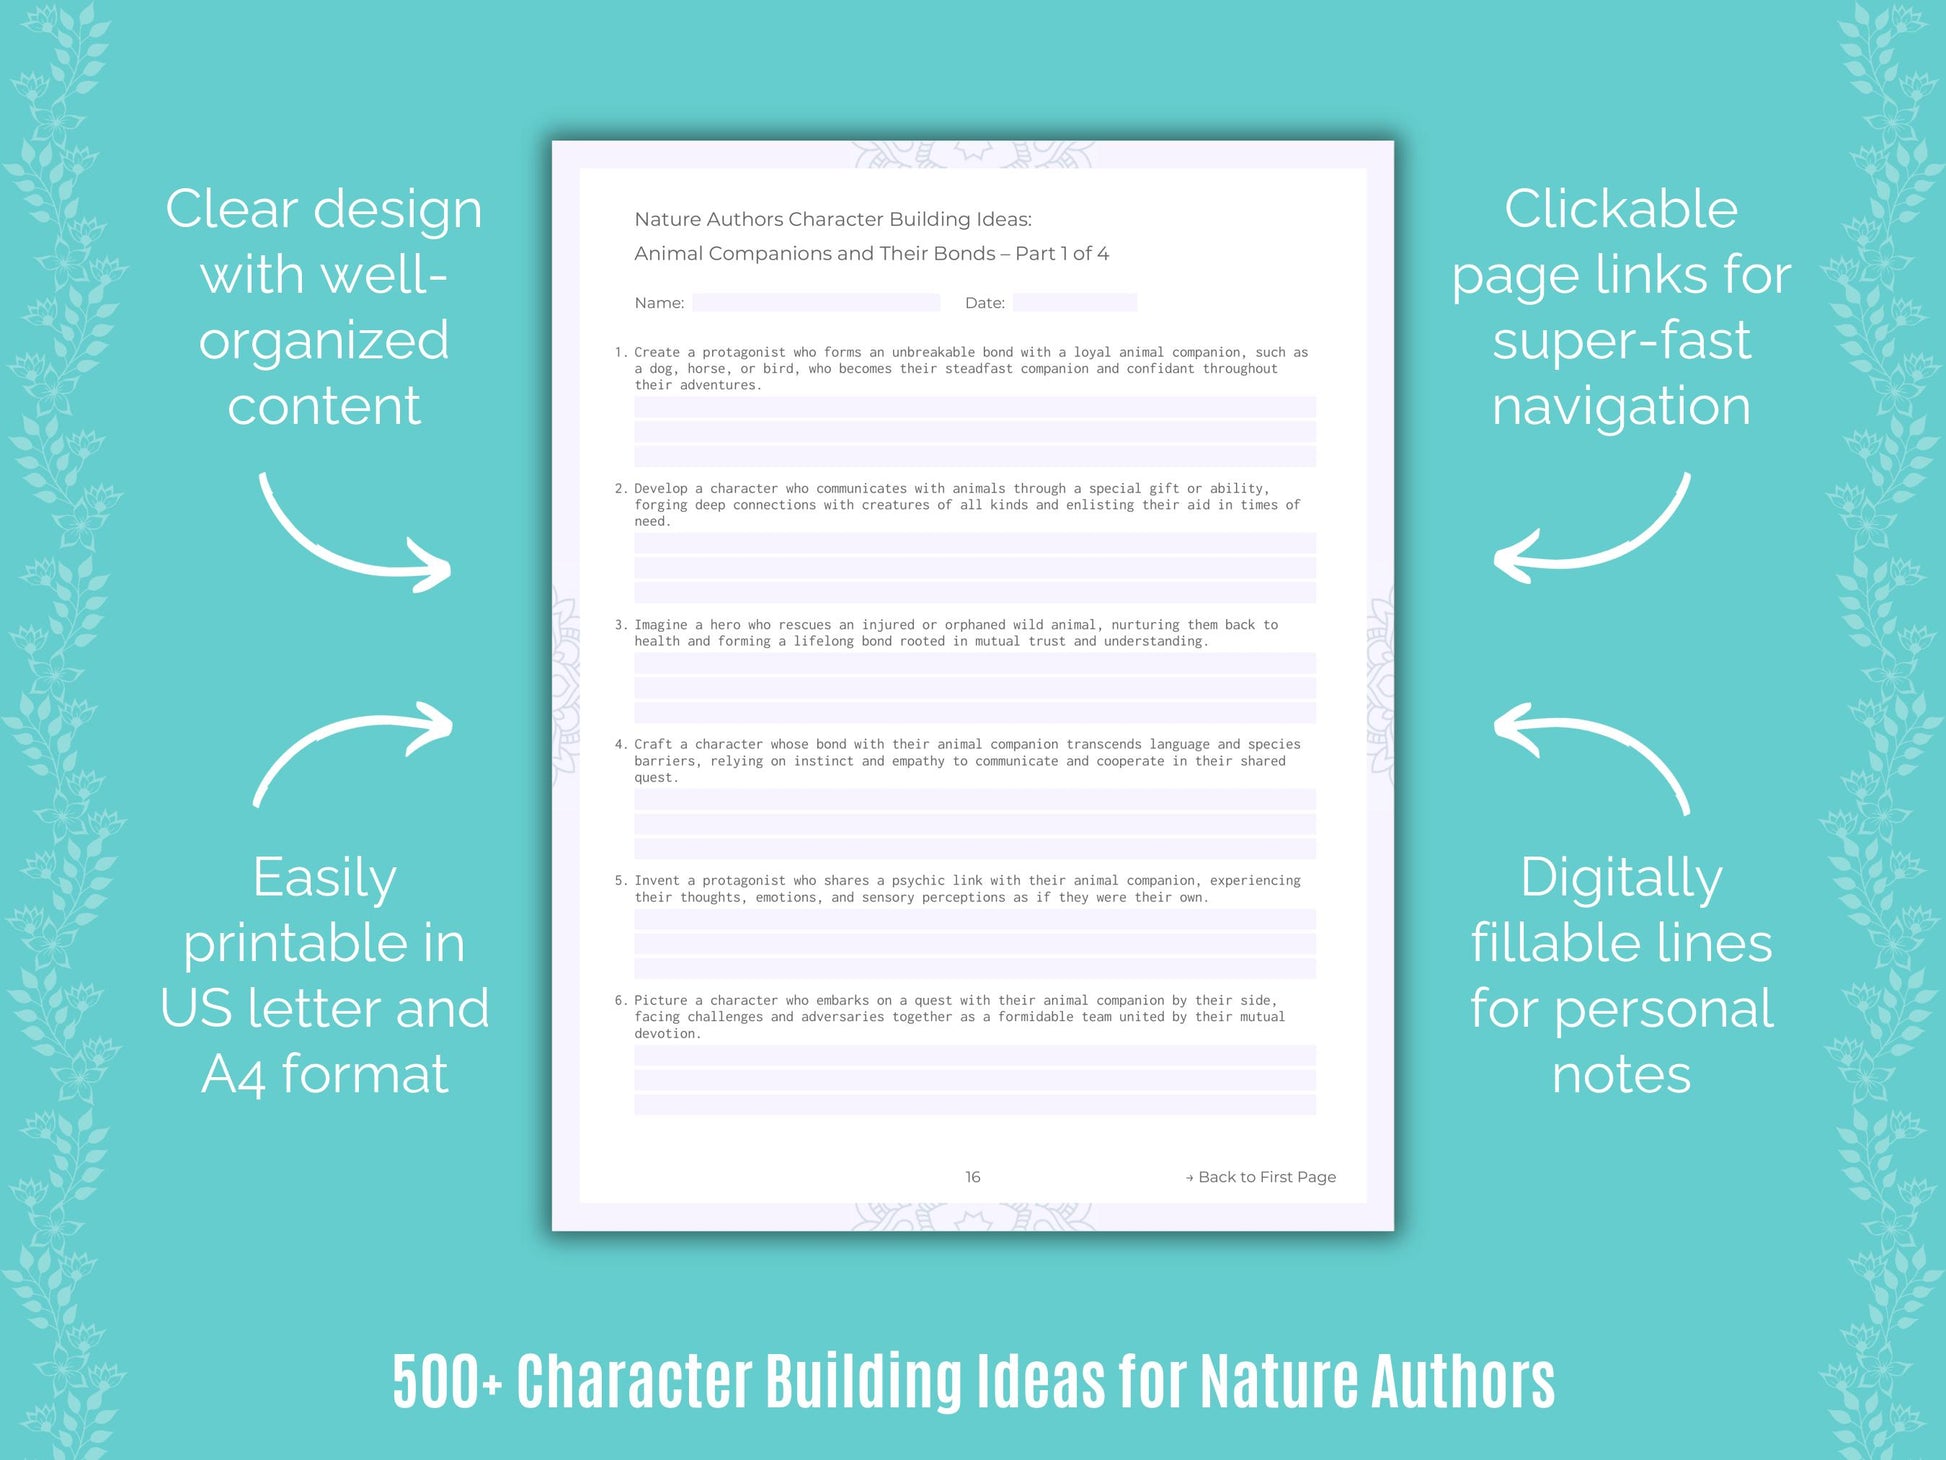 Nature Authors Character Building Ideas